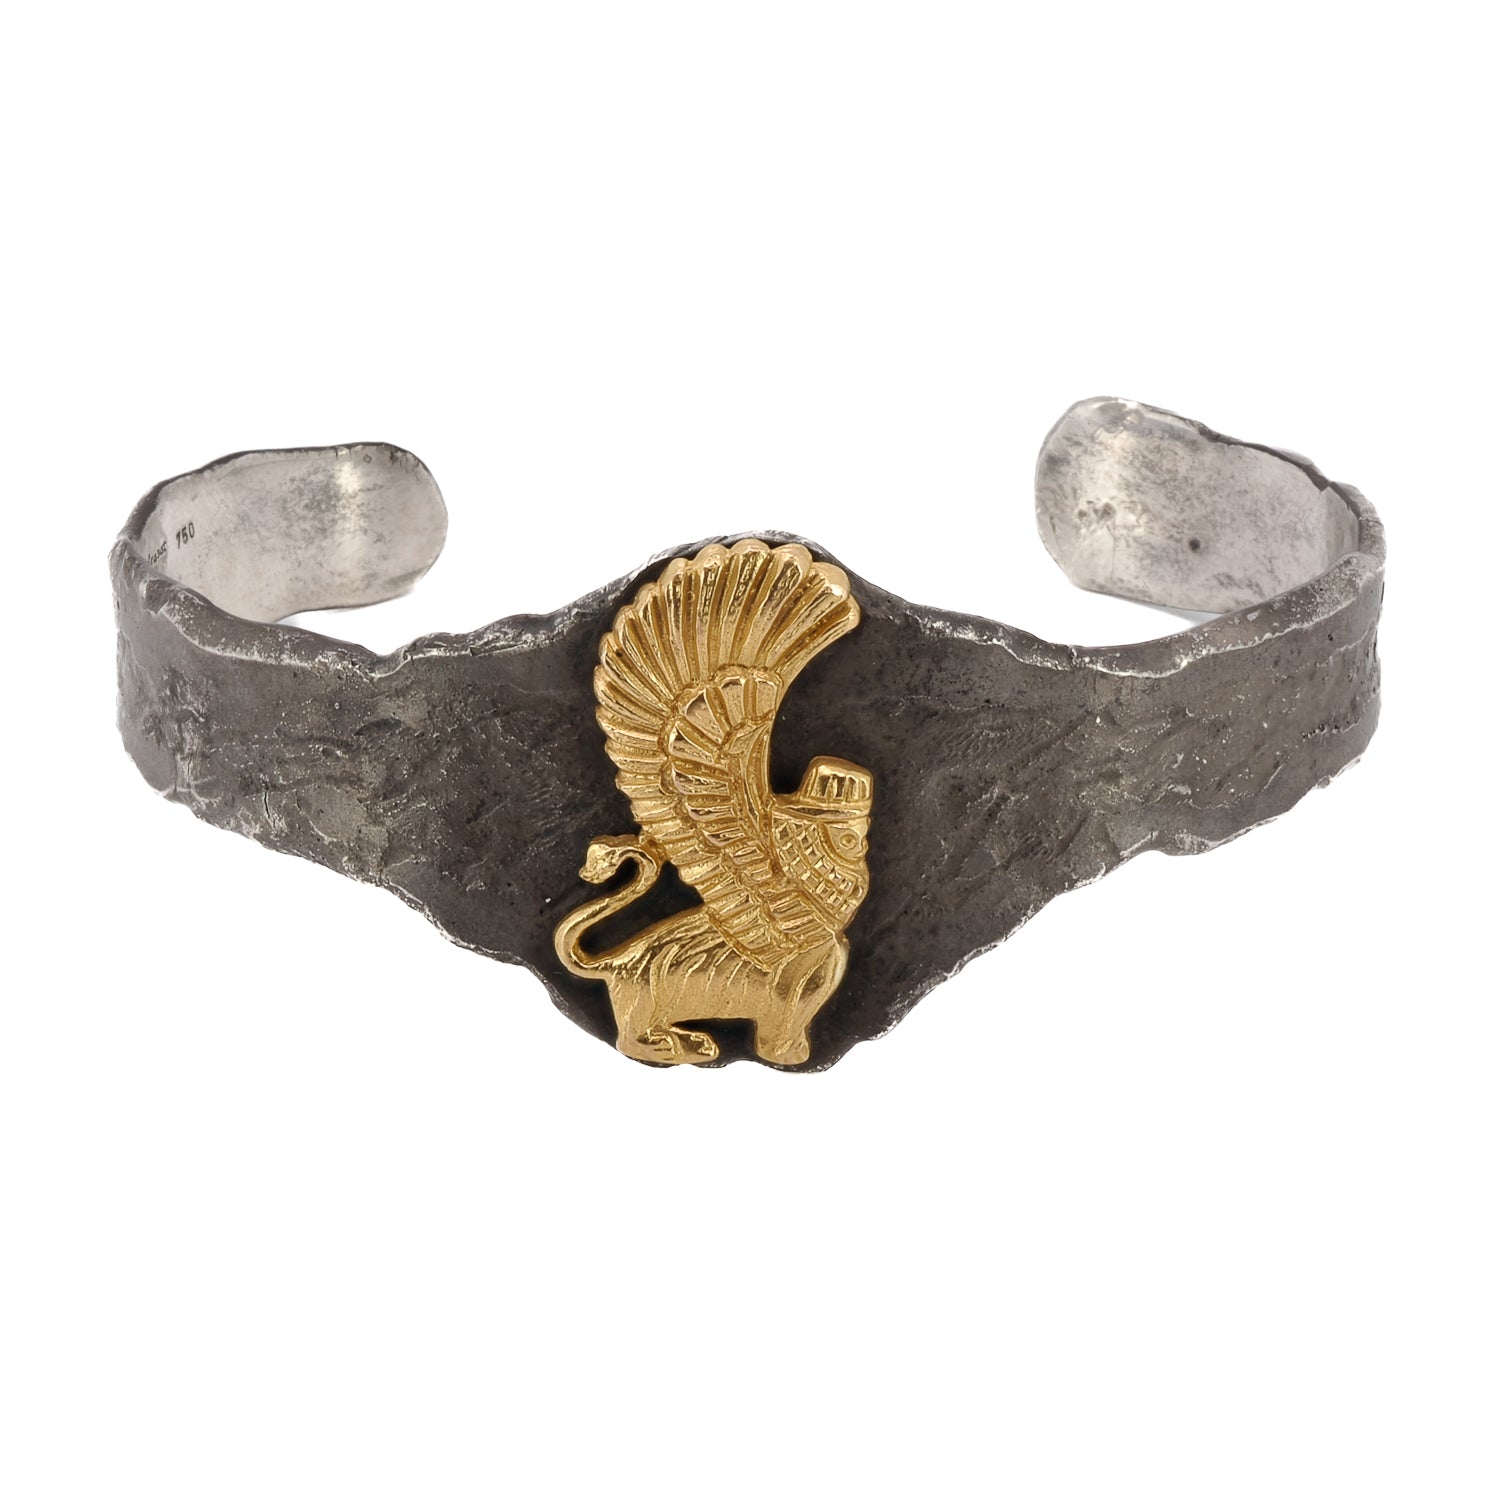 Assyrian Gold Lion Cuff Bracelet in Sterling Silver and 18k Gold